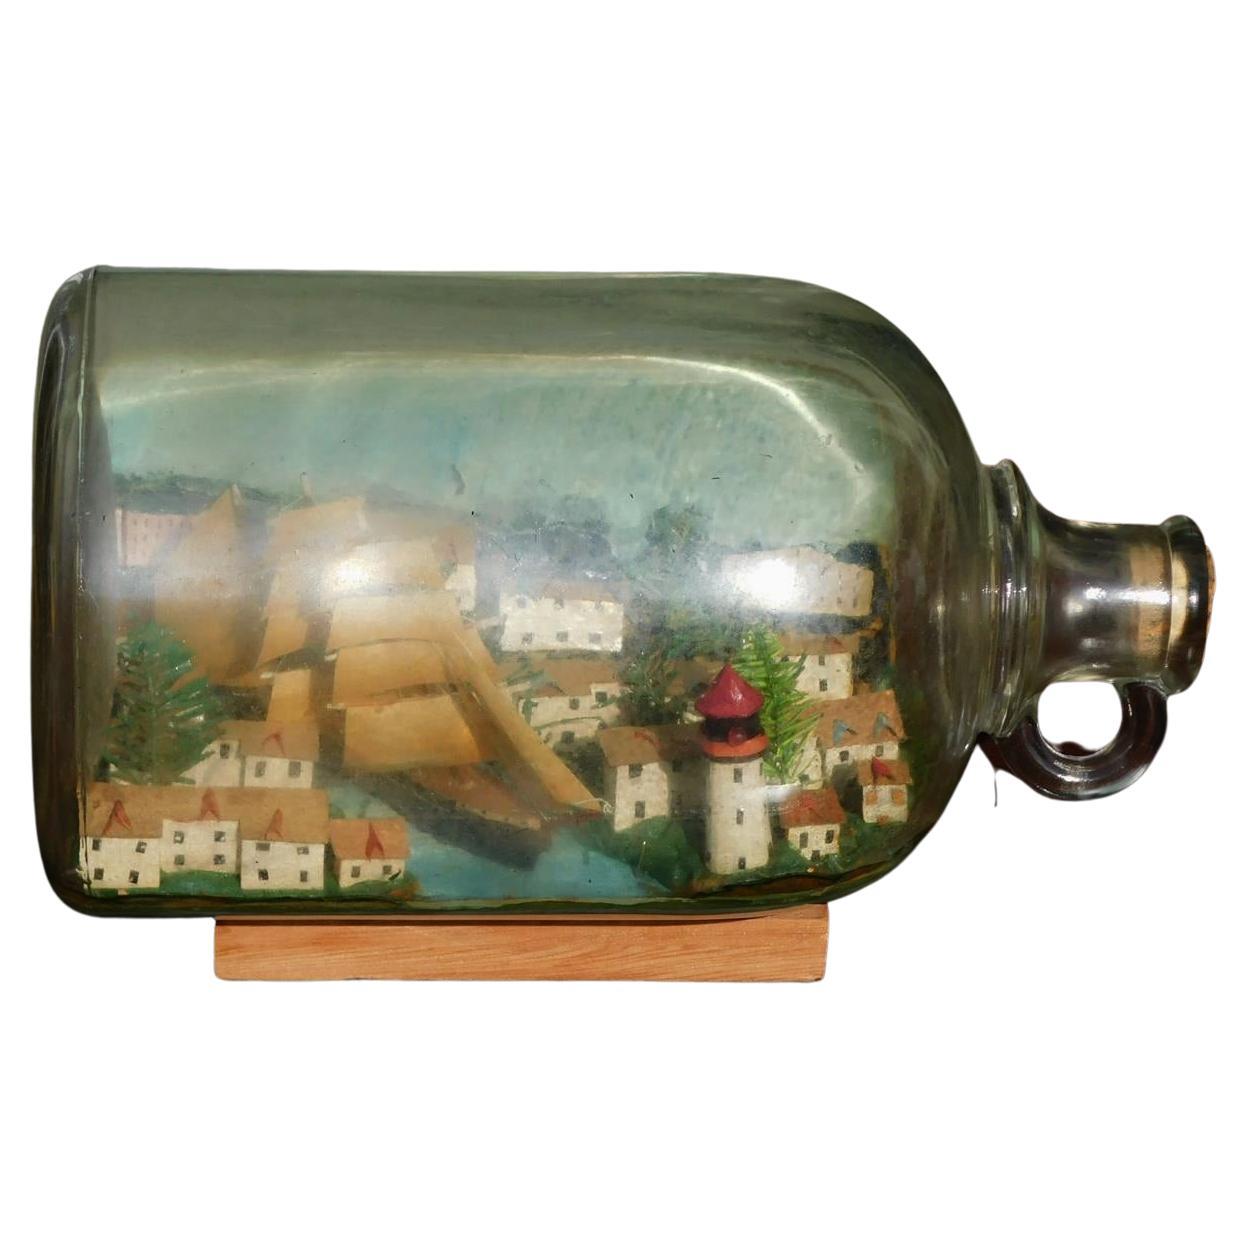 American Three Masted Clipper Ship in Bottle on Original Wood Stand, Circa 1880 For Sale